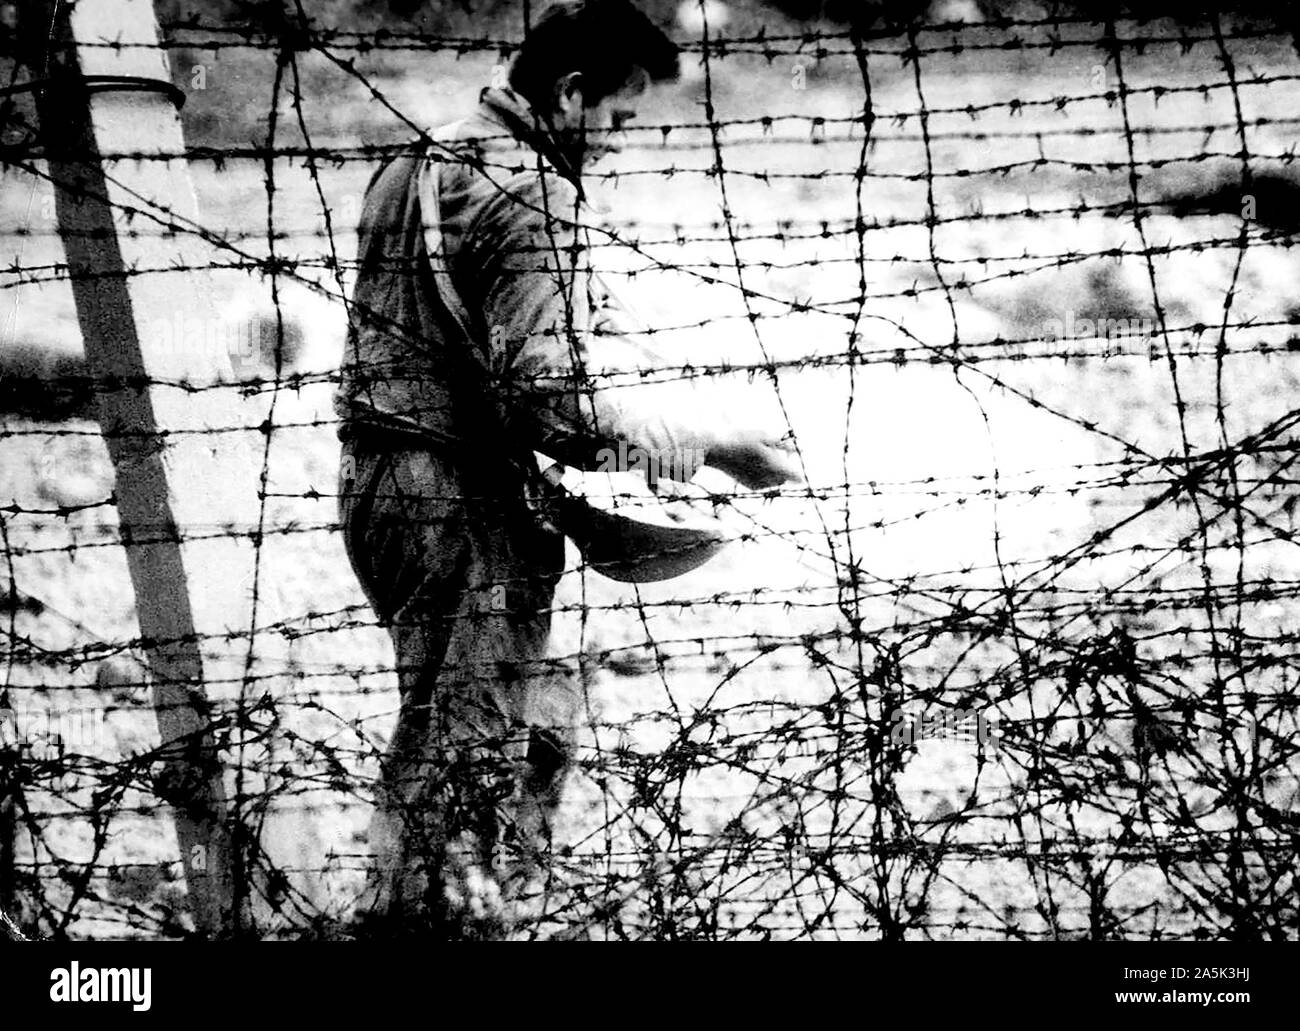 'Death Strip' Although He Resembles A Farmer Sowing Seed, This East German Workman Is Sprinkling Chemicals to Kill Weeds in the 'Death Strip' Along The Communist Built Wall In East Berlin Stock Photo